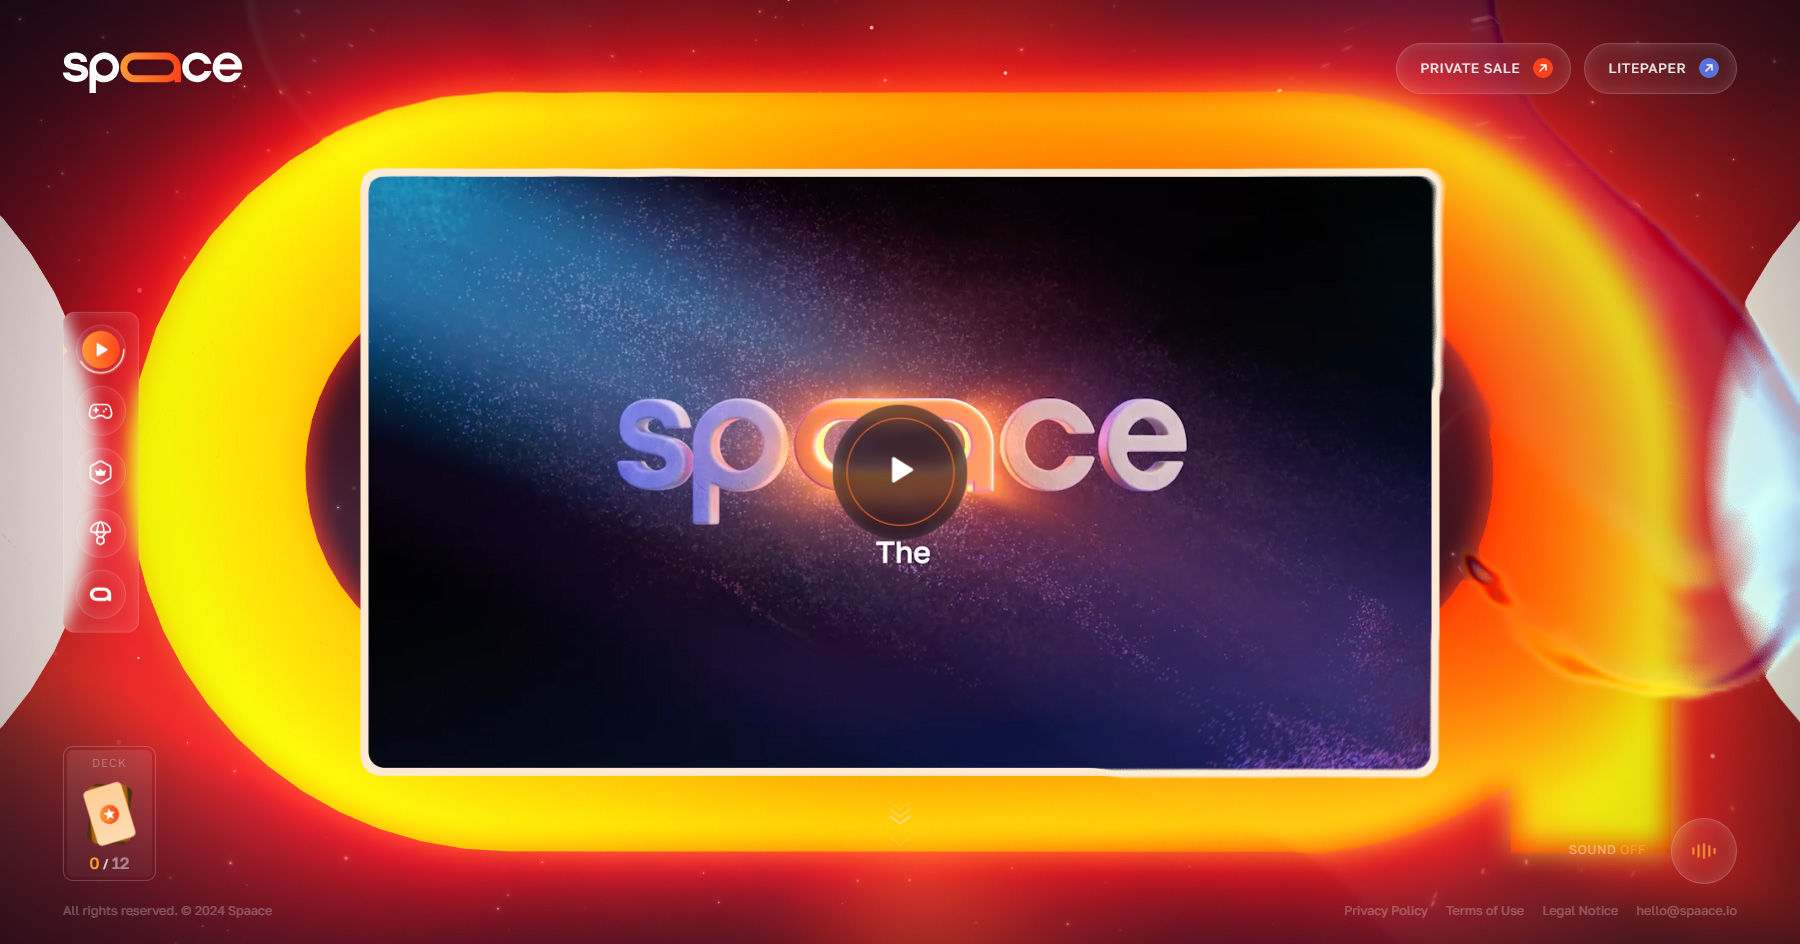 Spaace - Website of the Day